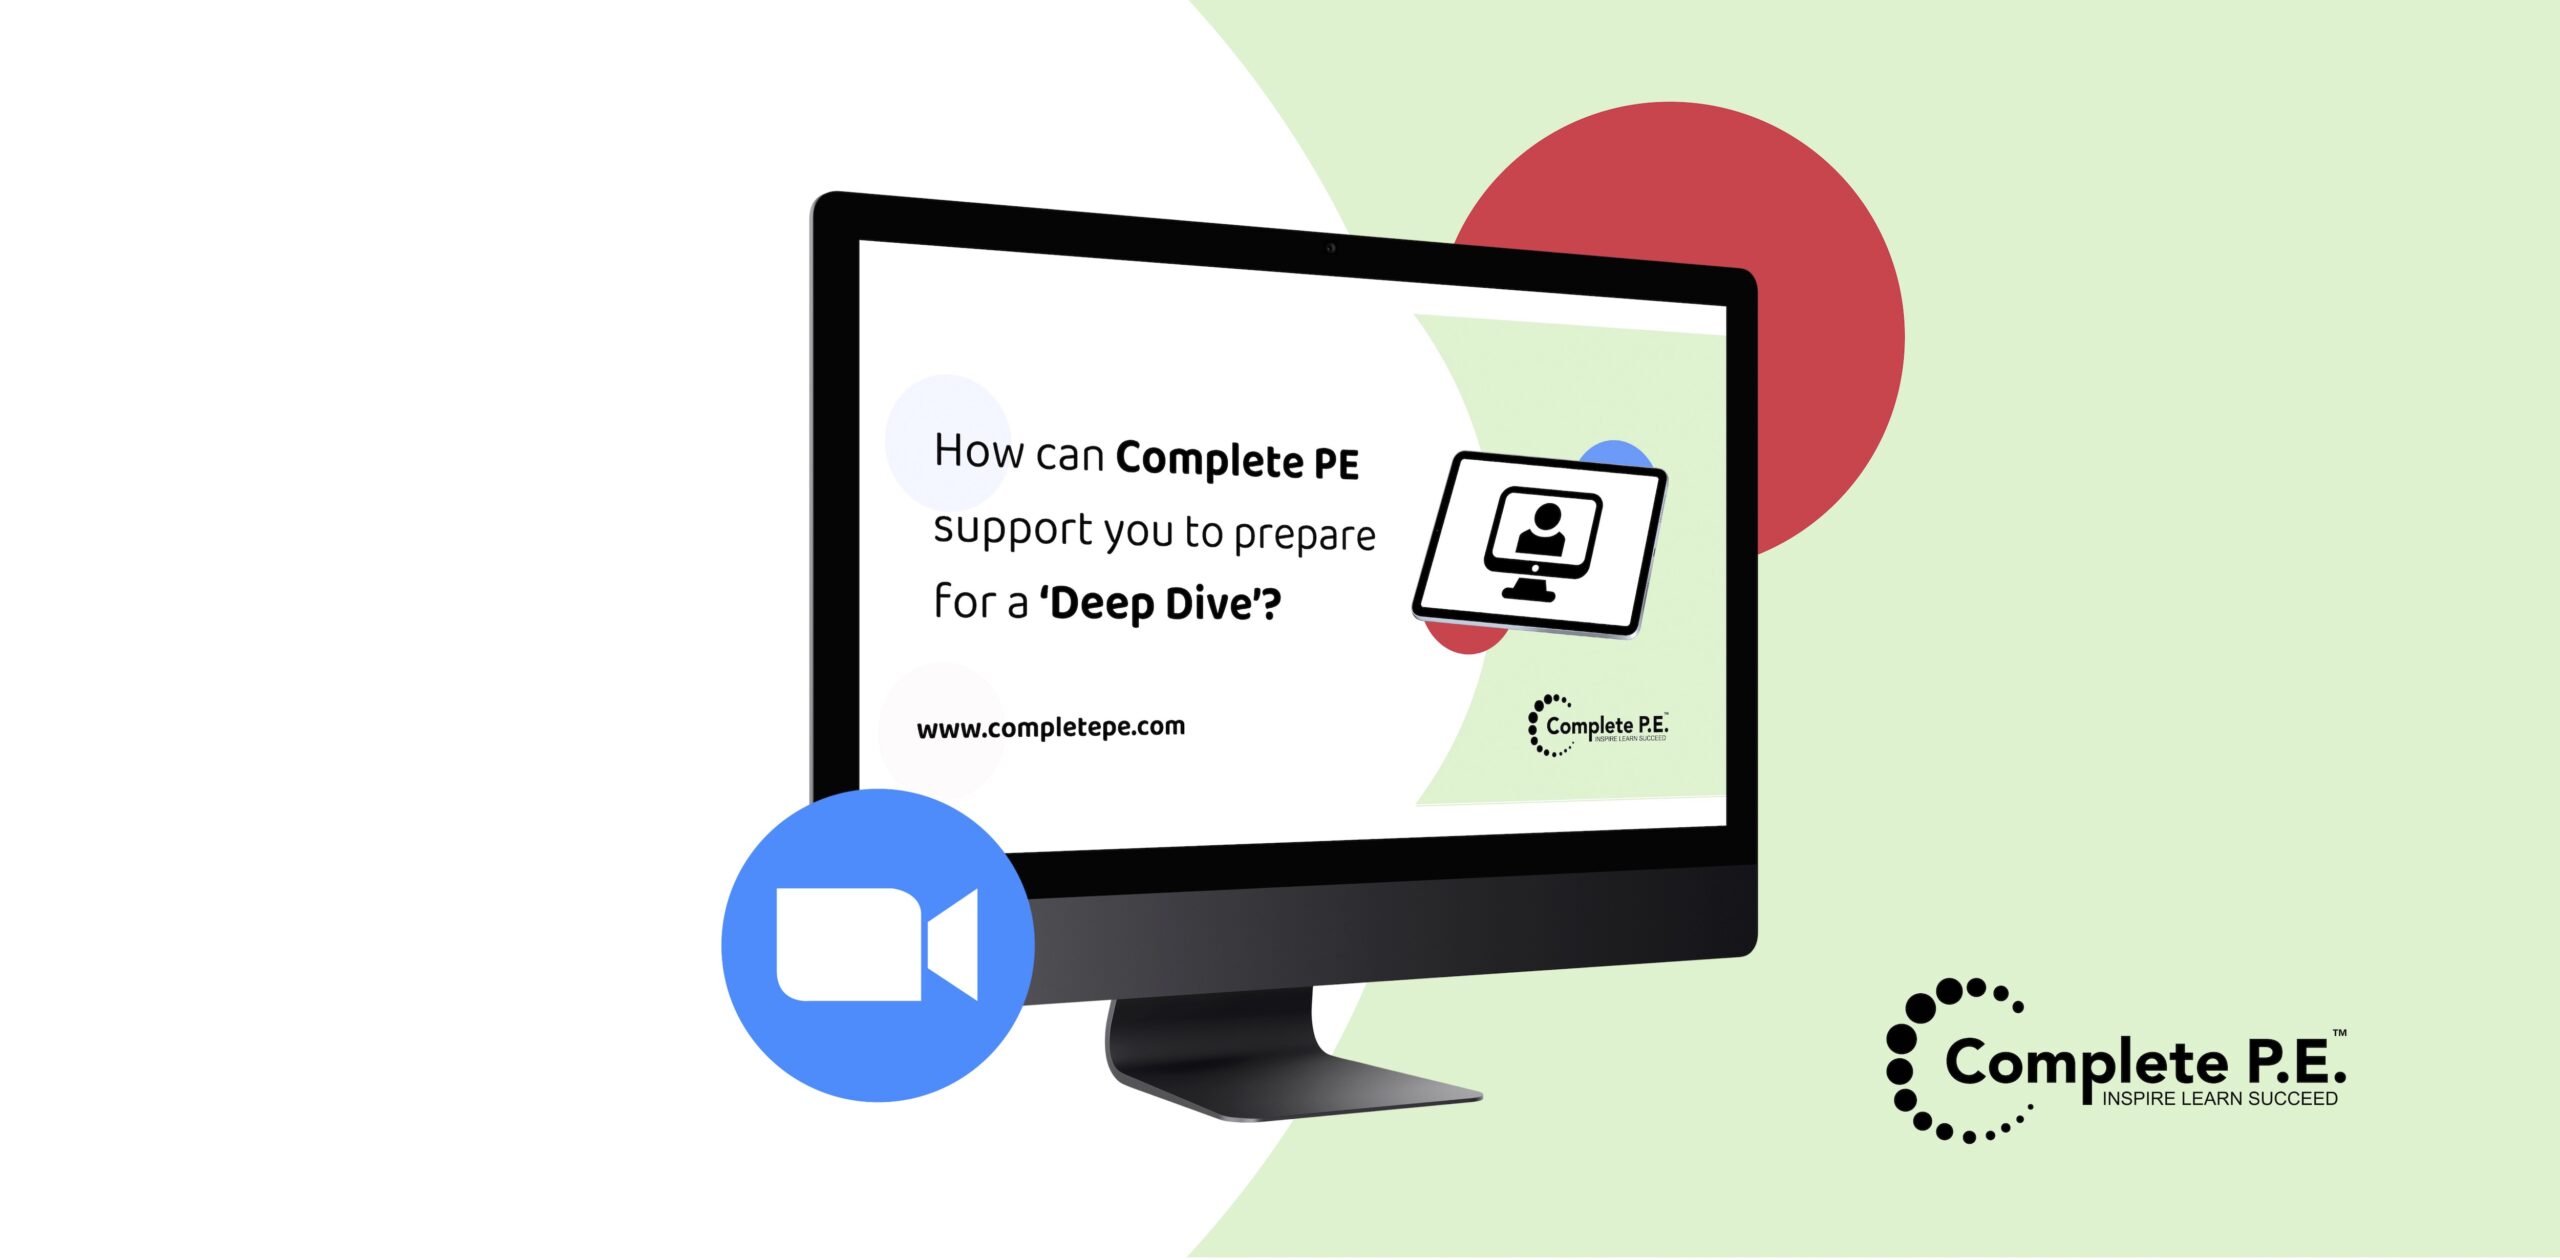 How can Complete PE support you to prepare for a Deep Dive?